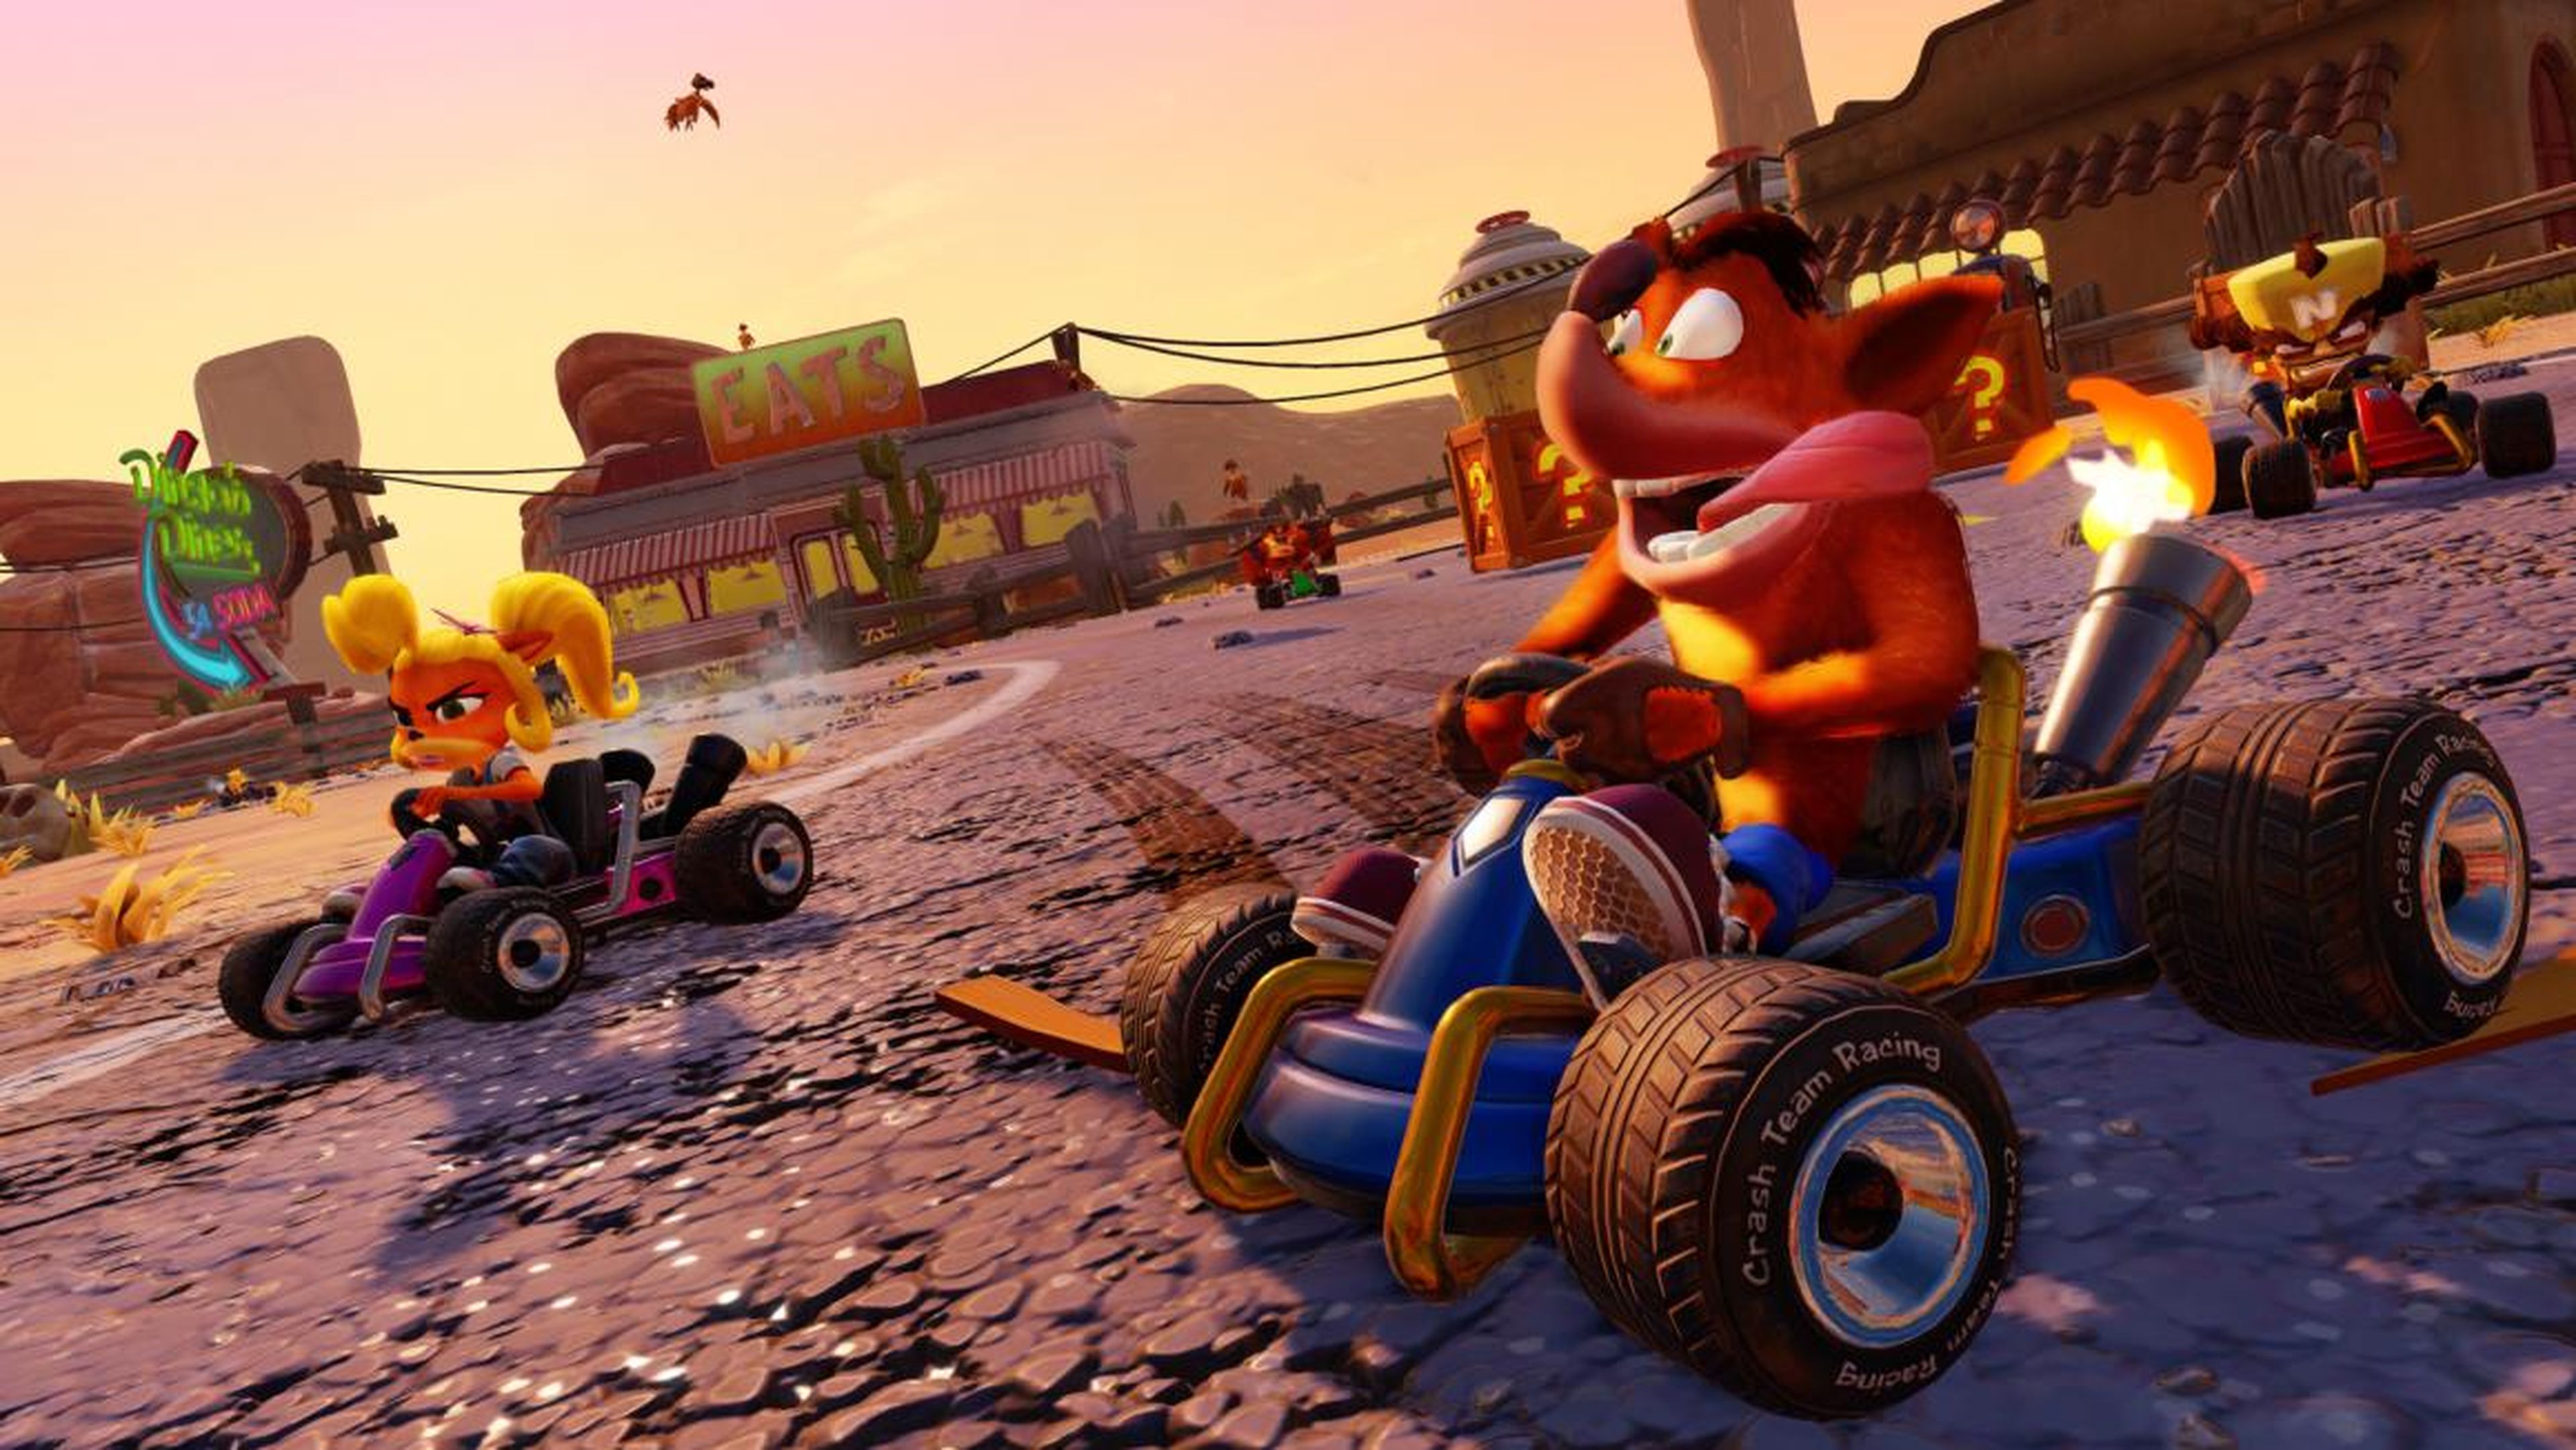 Are you ready for more Crash Bandicoot?